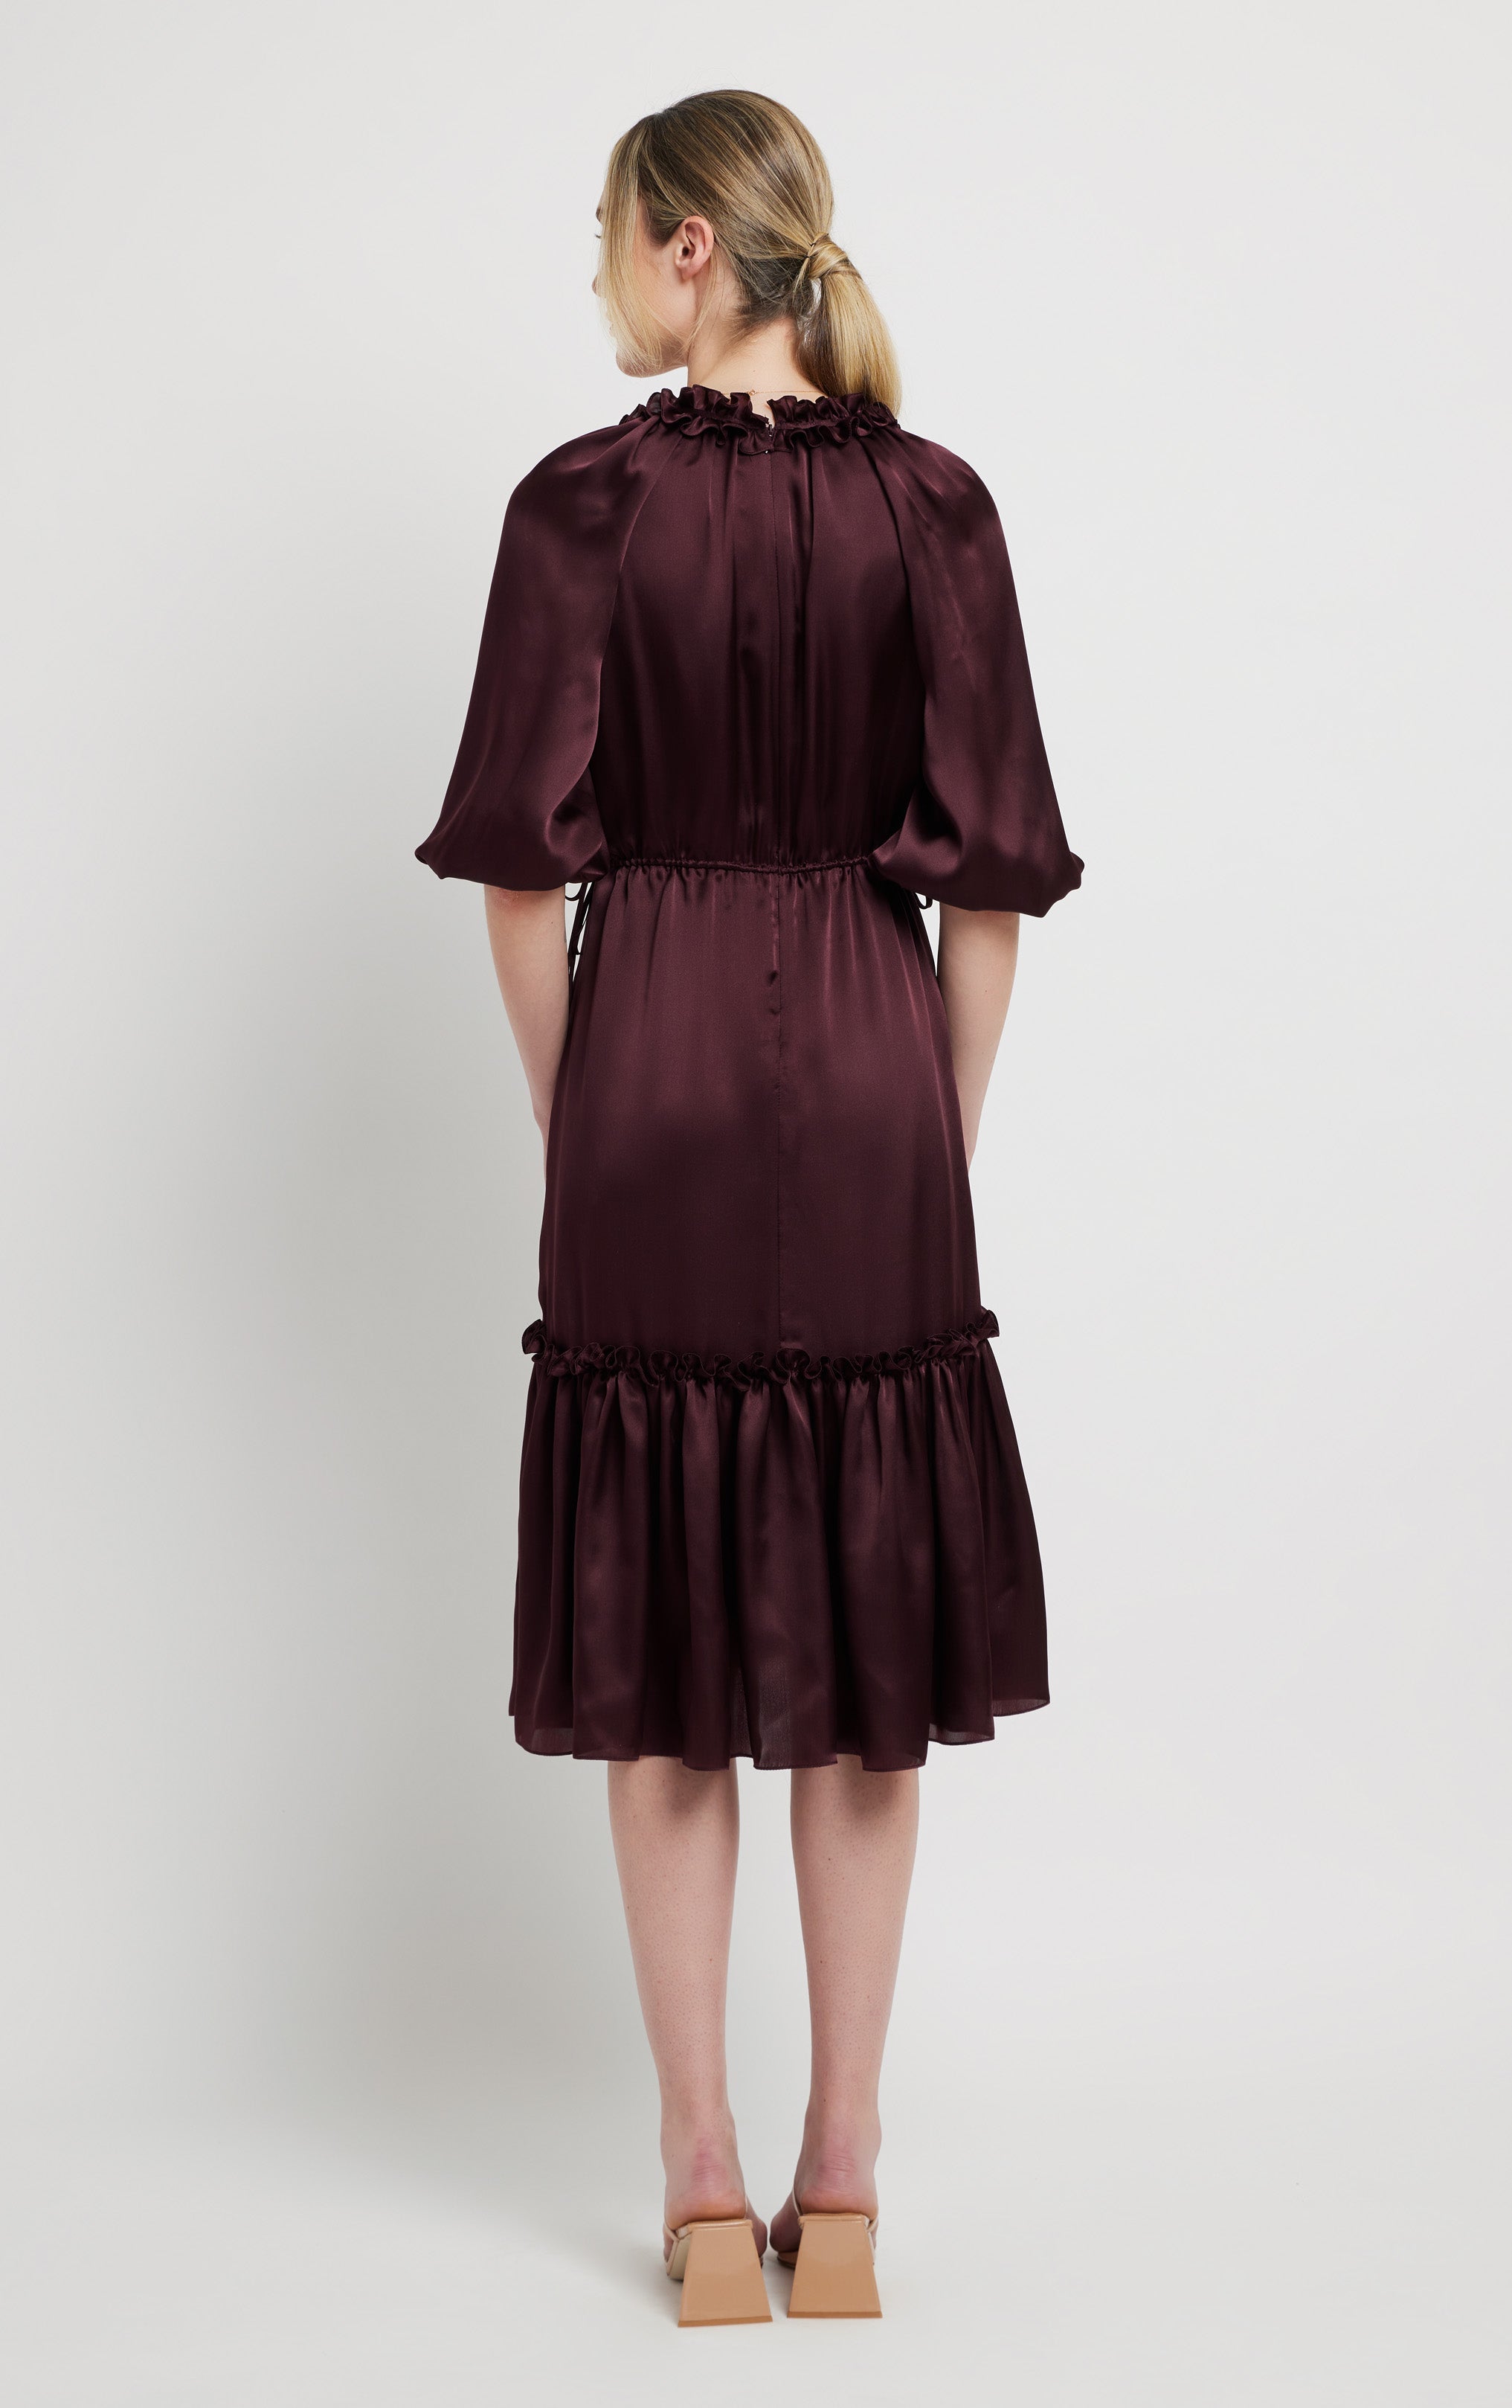 back view of woman wearing burgundy silk dress with invisible zipper ruffled neck and puffed sleeves